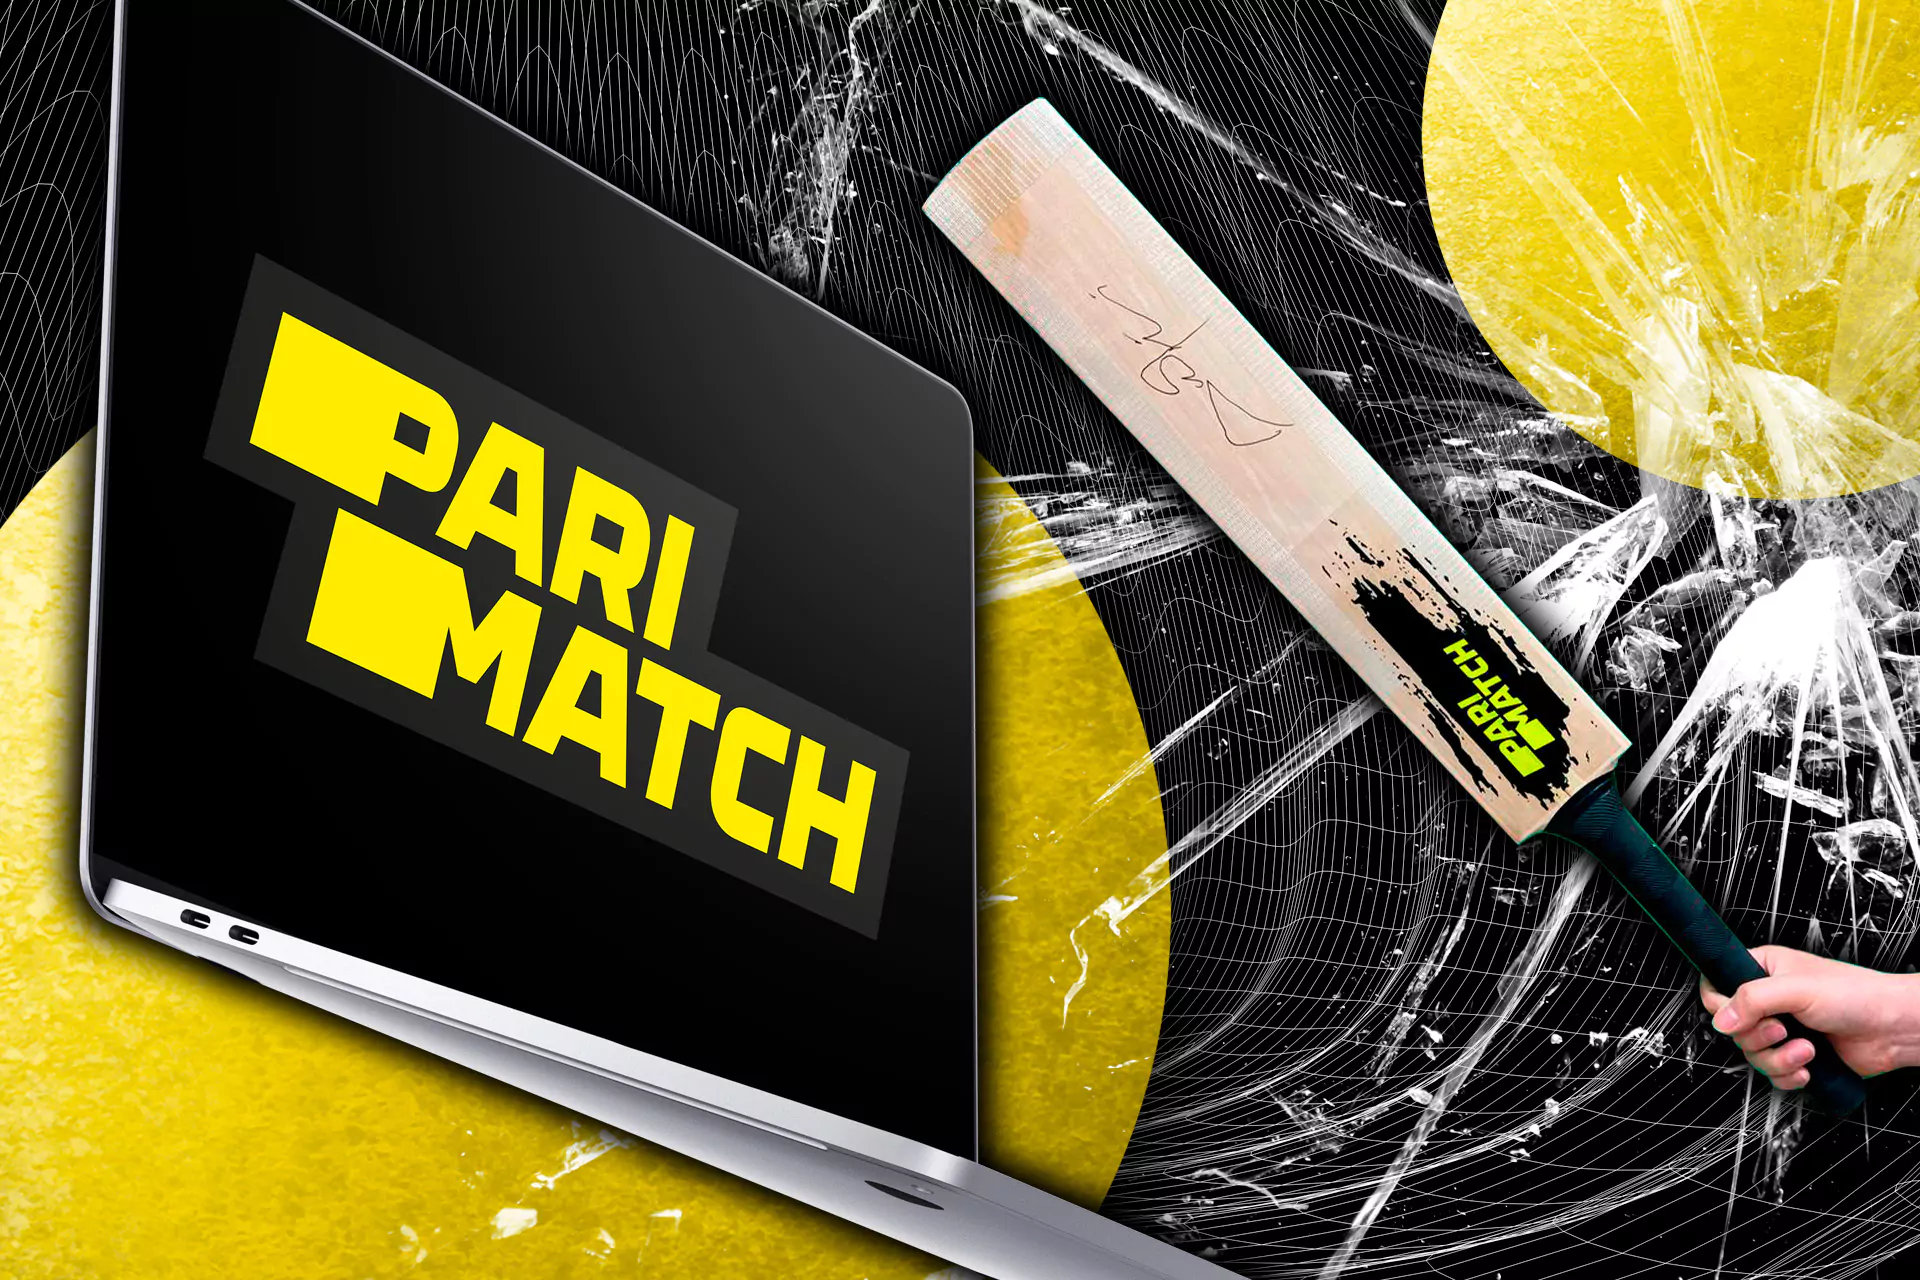 Parimatch has a convenient website with many nice options ecpecially for online cricket betting.